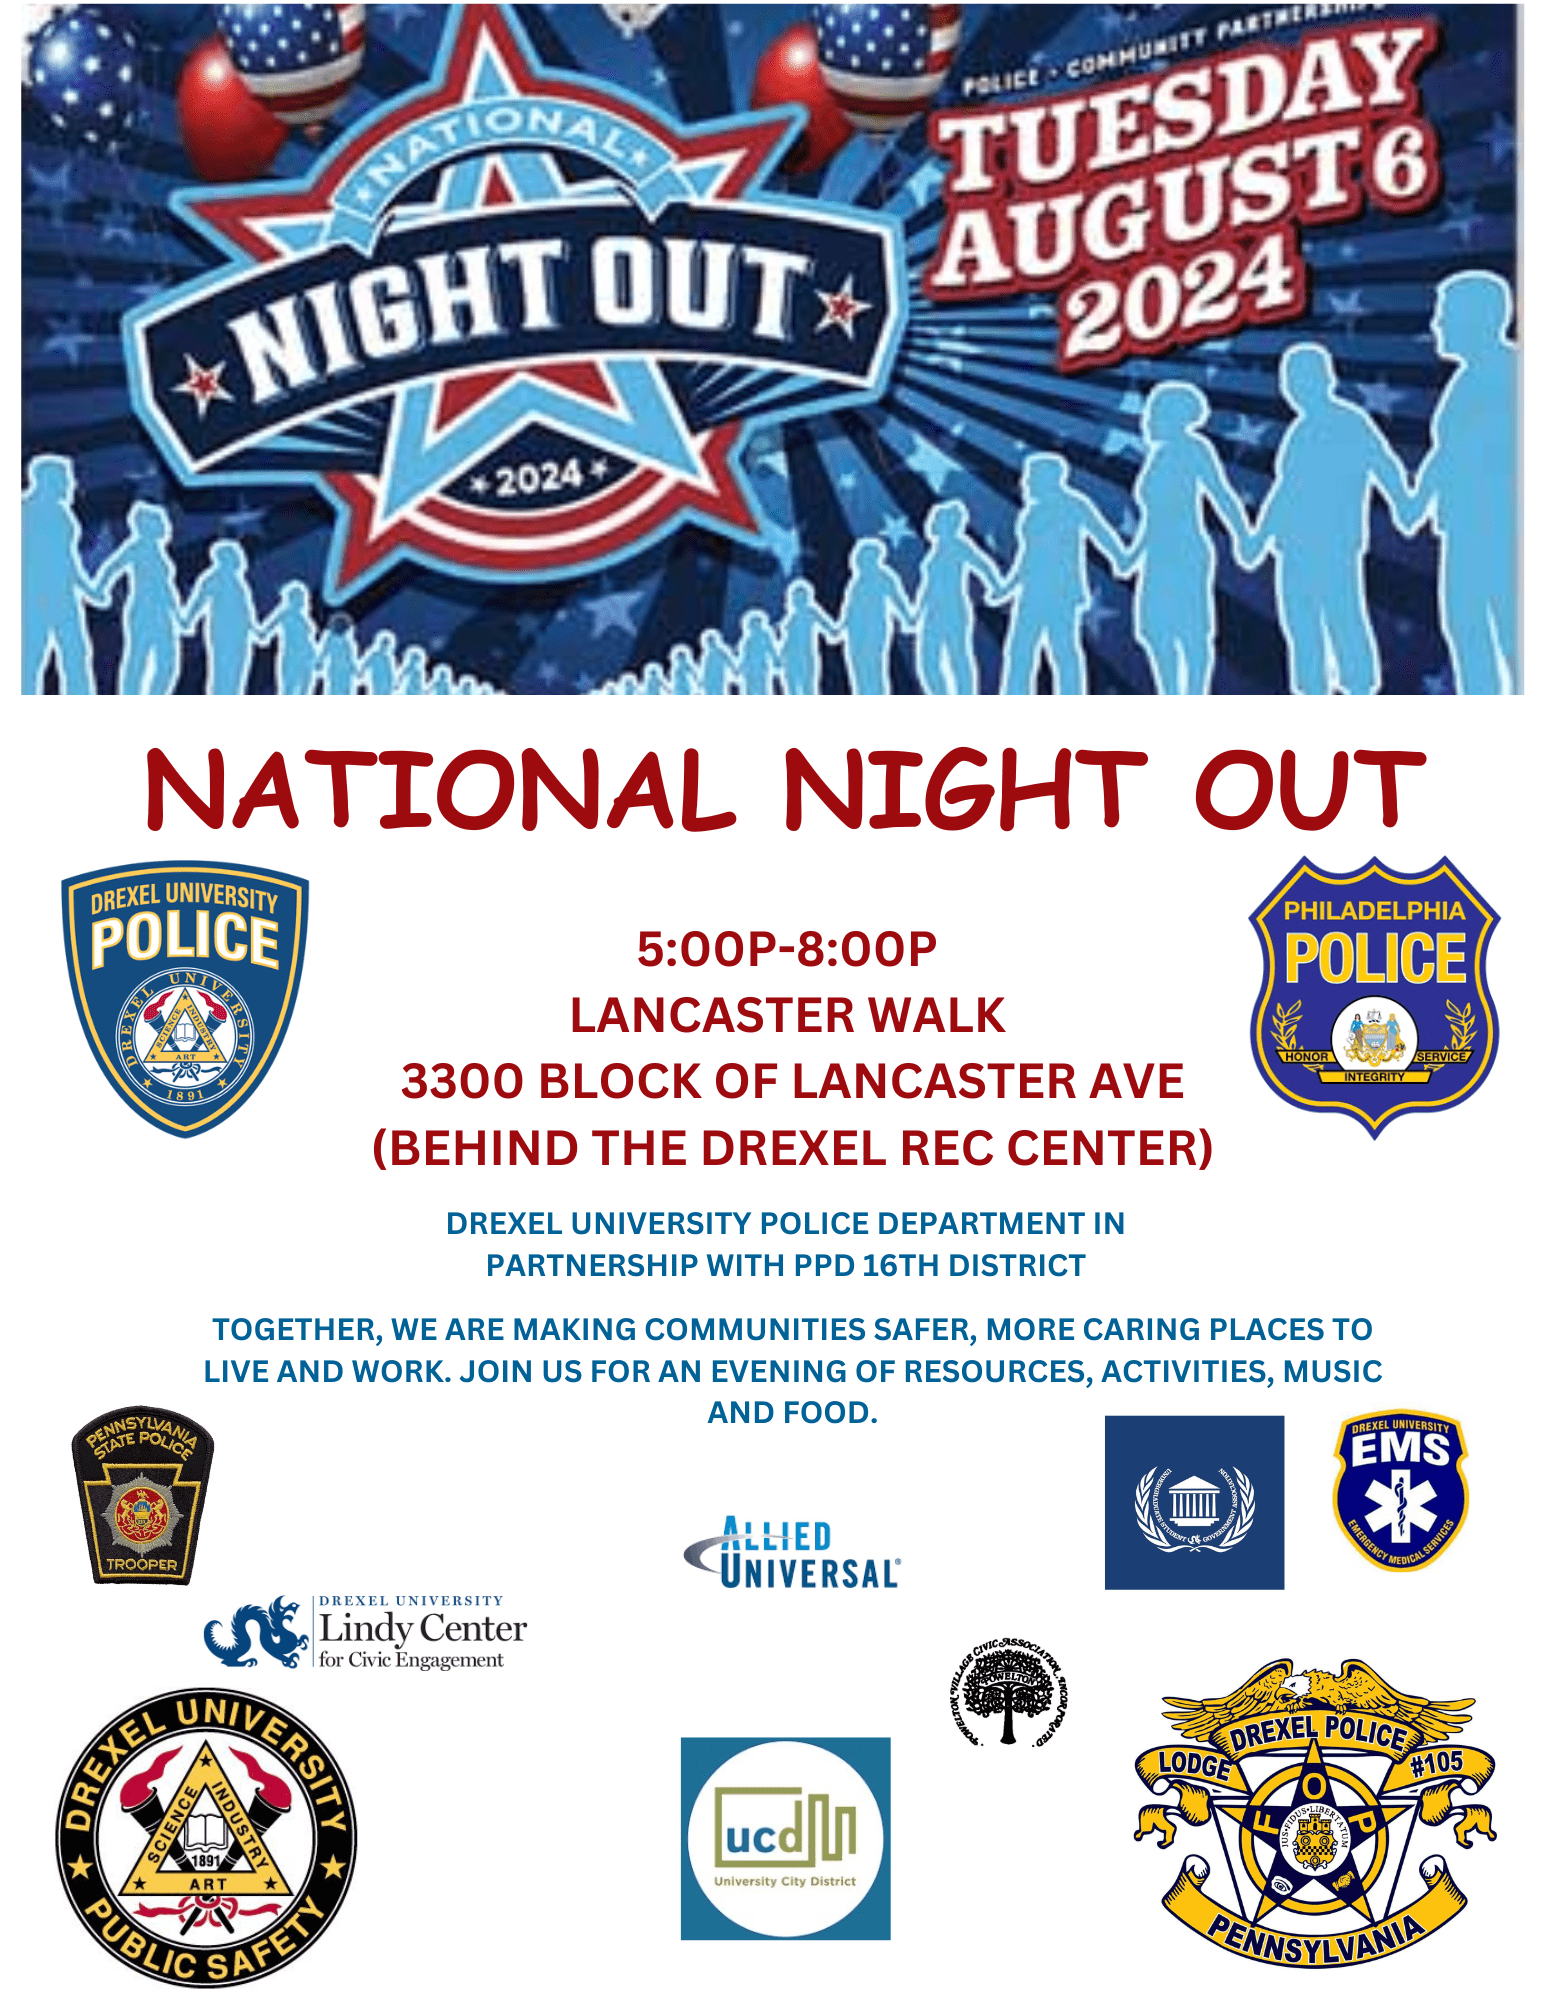 Flyer for National Night Out on Aug. 6 from 5-8 pm on Lancaster Walk